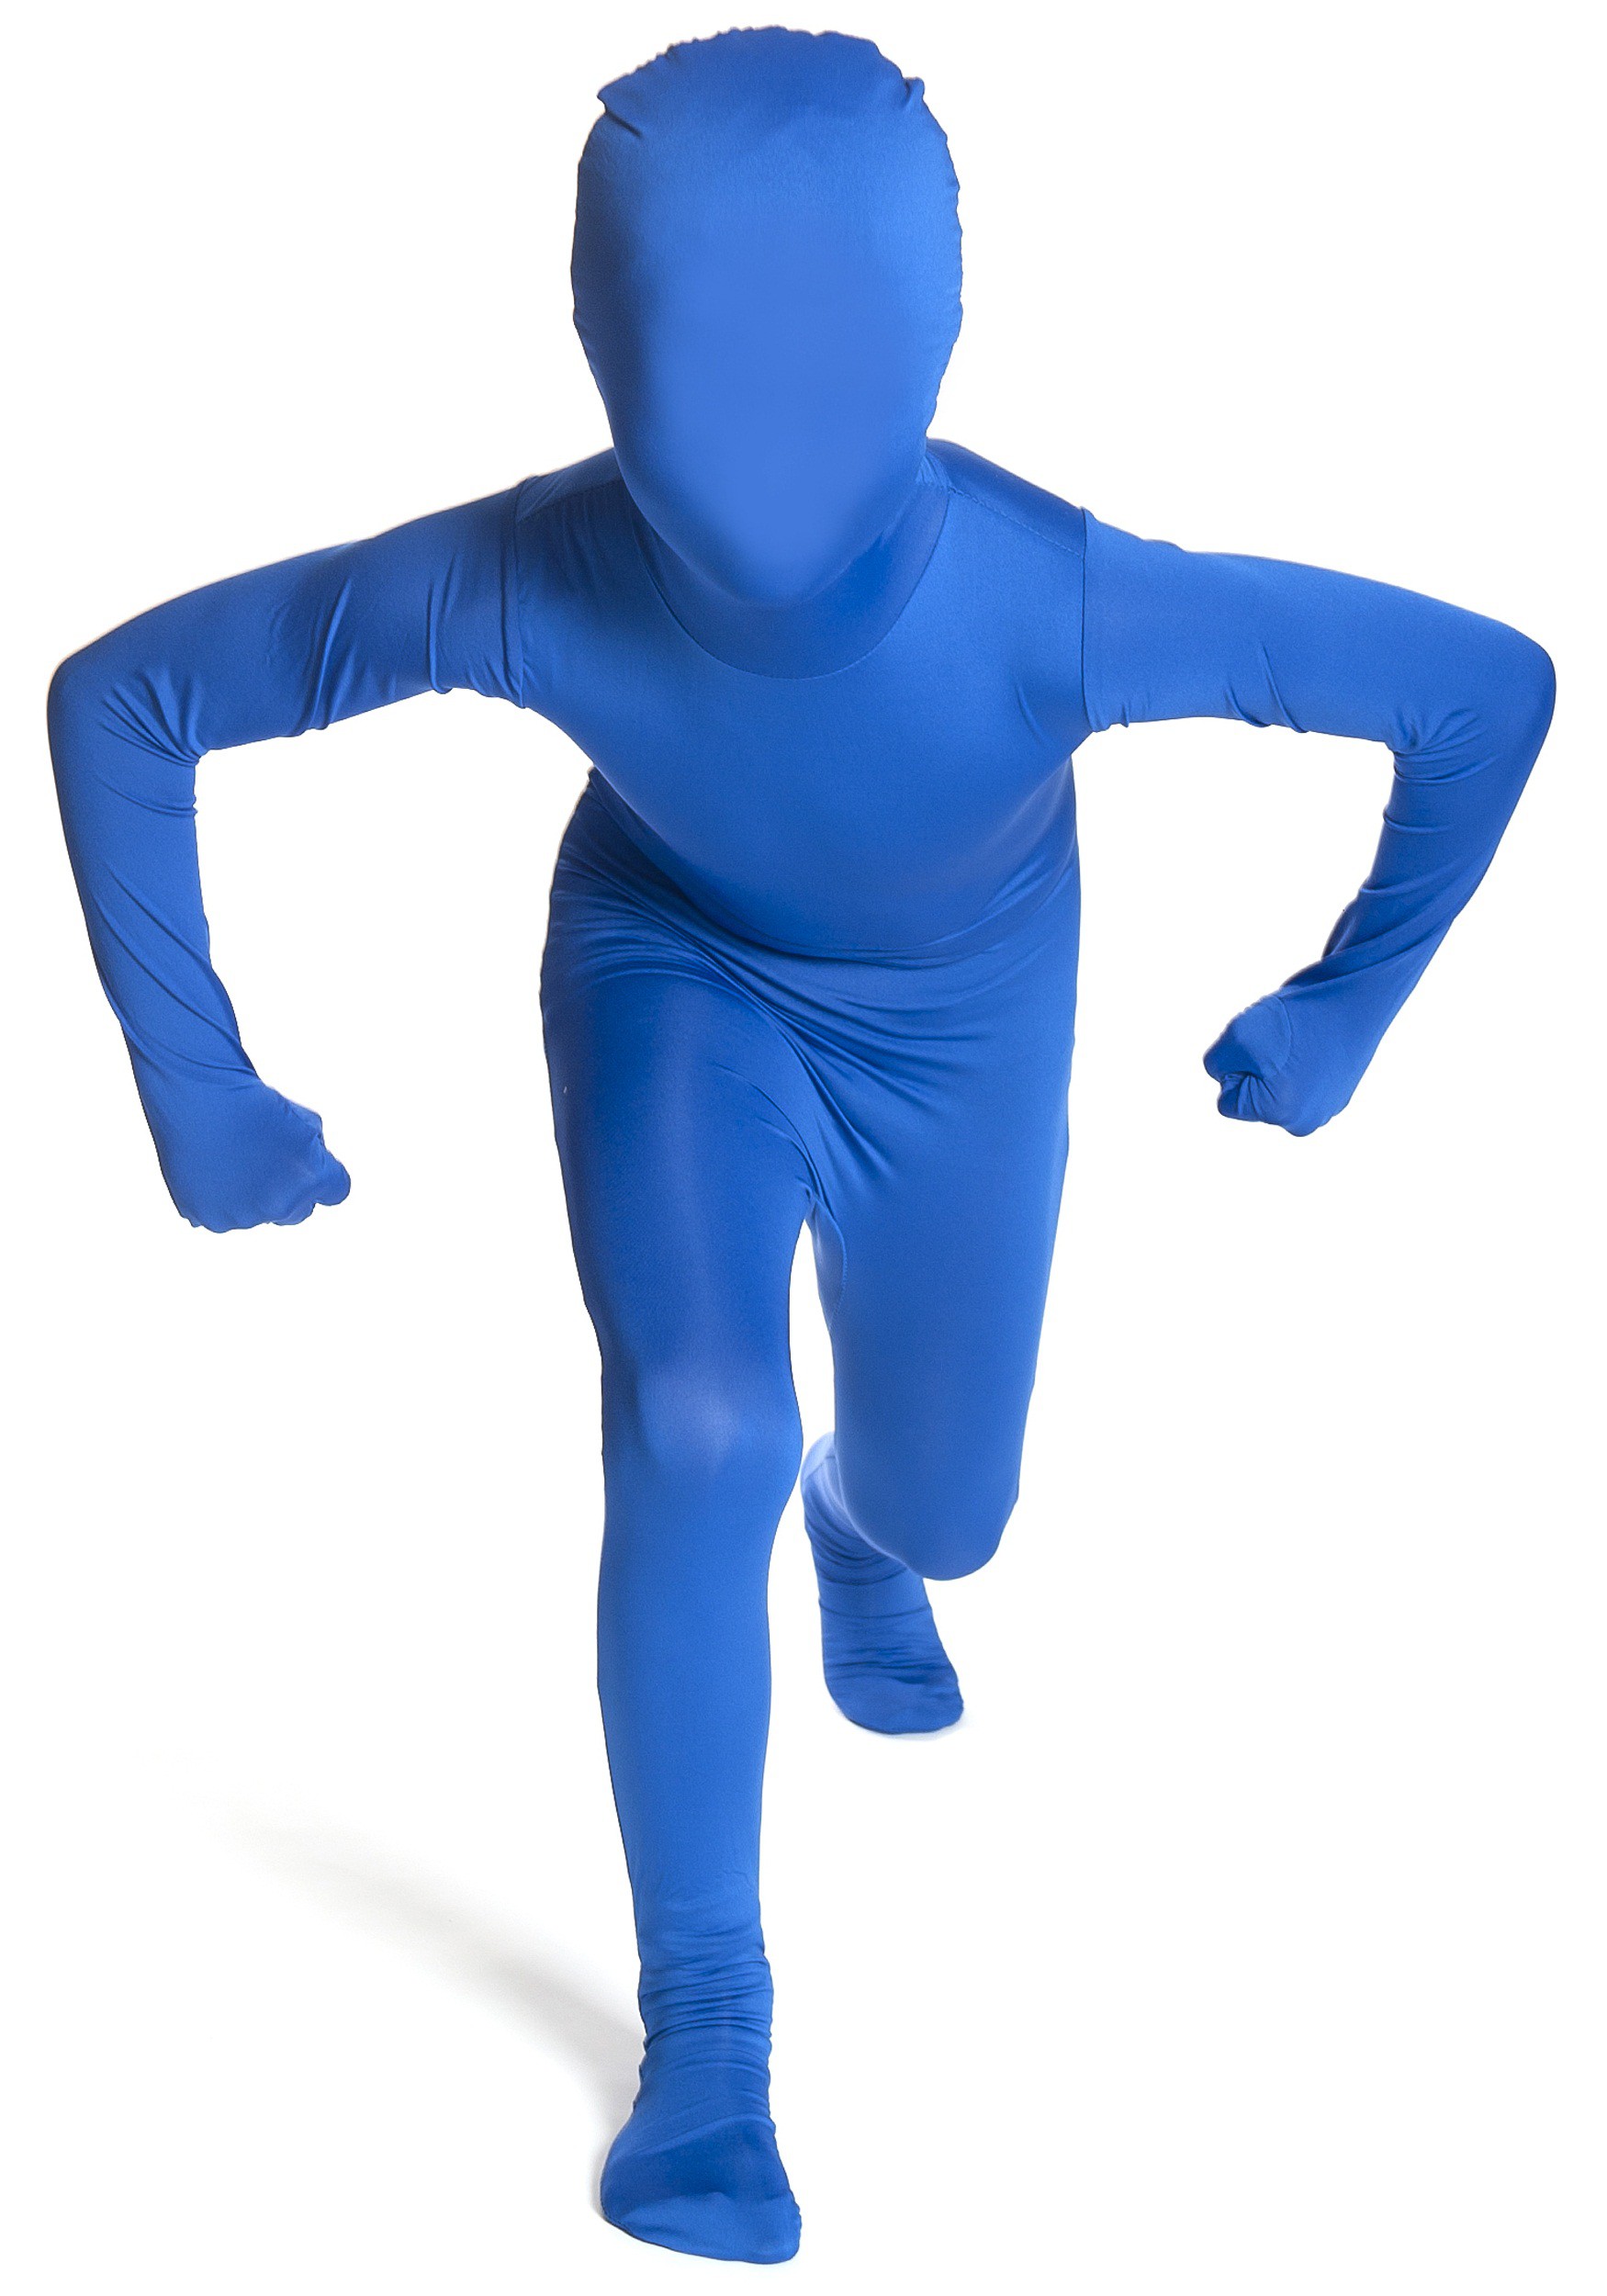 https://images.halloweencostumes.com/products/29768/1-1/child-blue-morphsuit.jpg